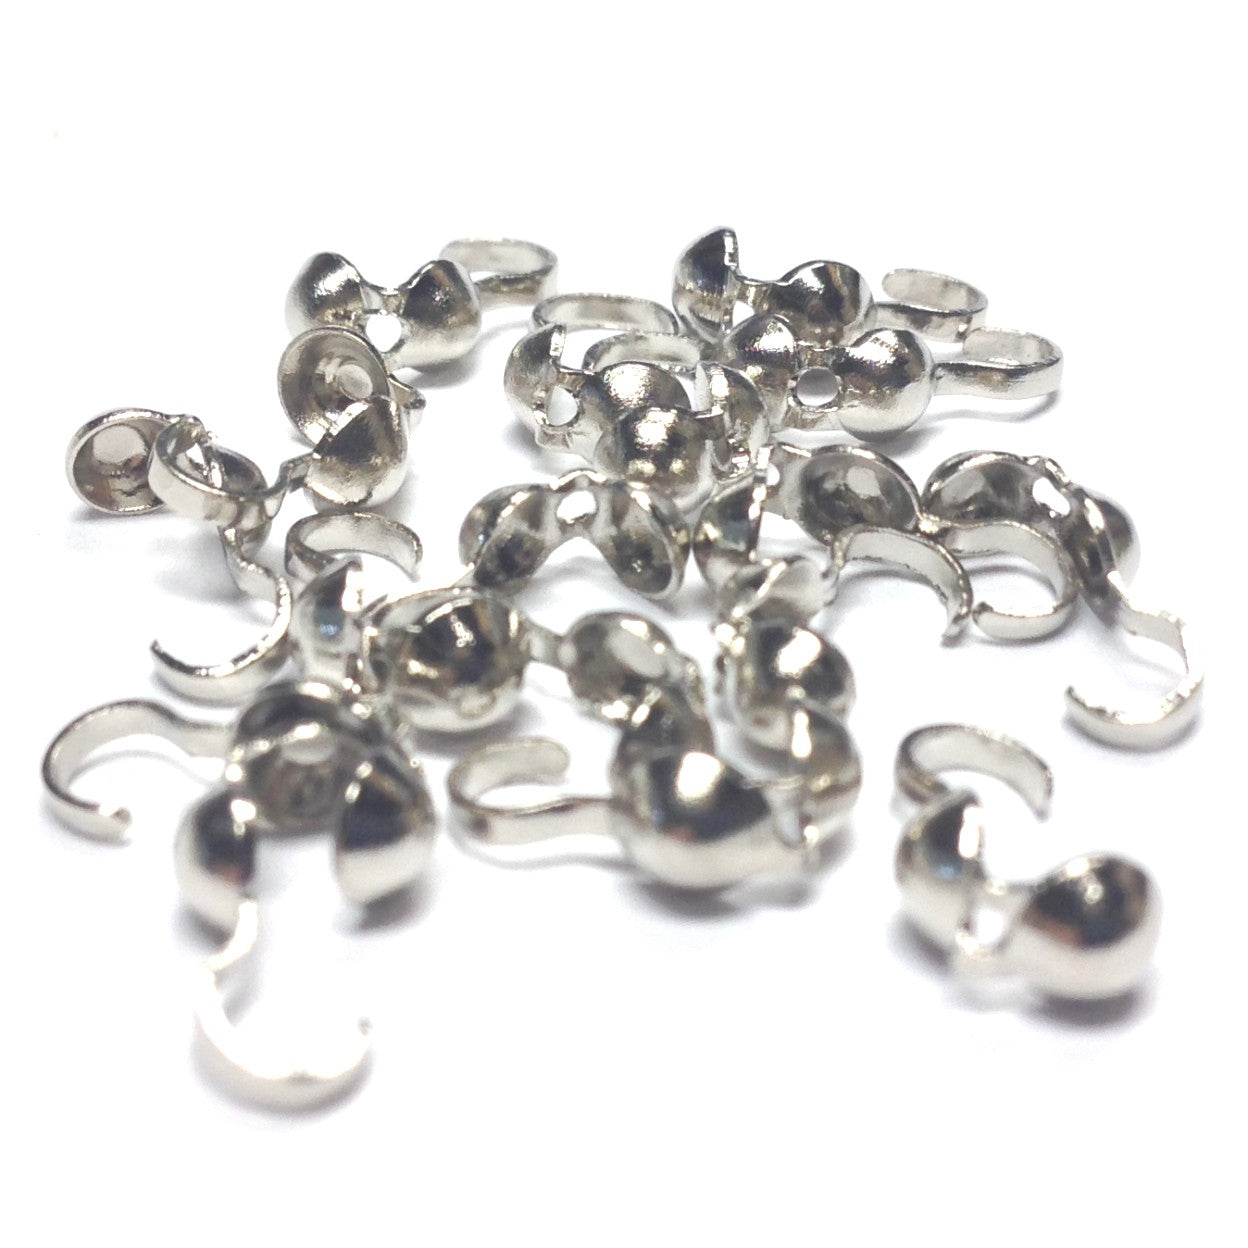 Foldover Bead Tip With Hole Nickel (144 pieces)